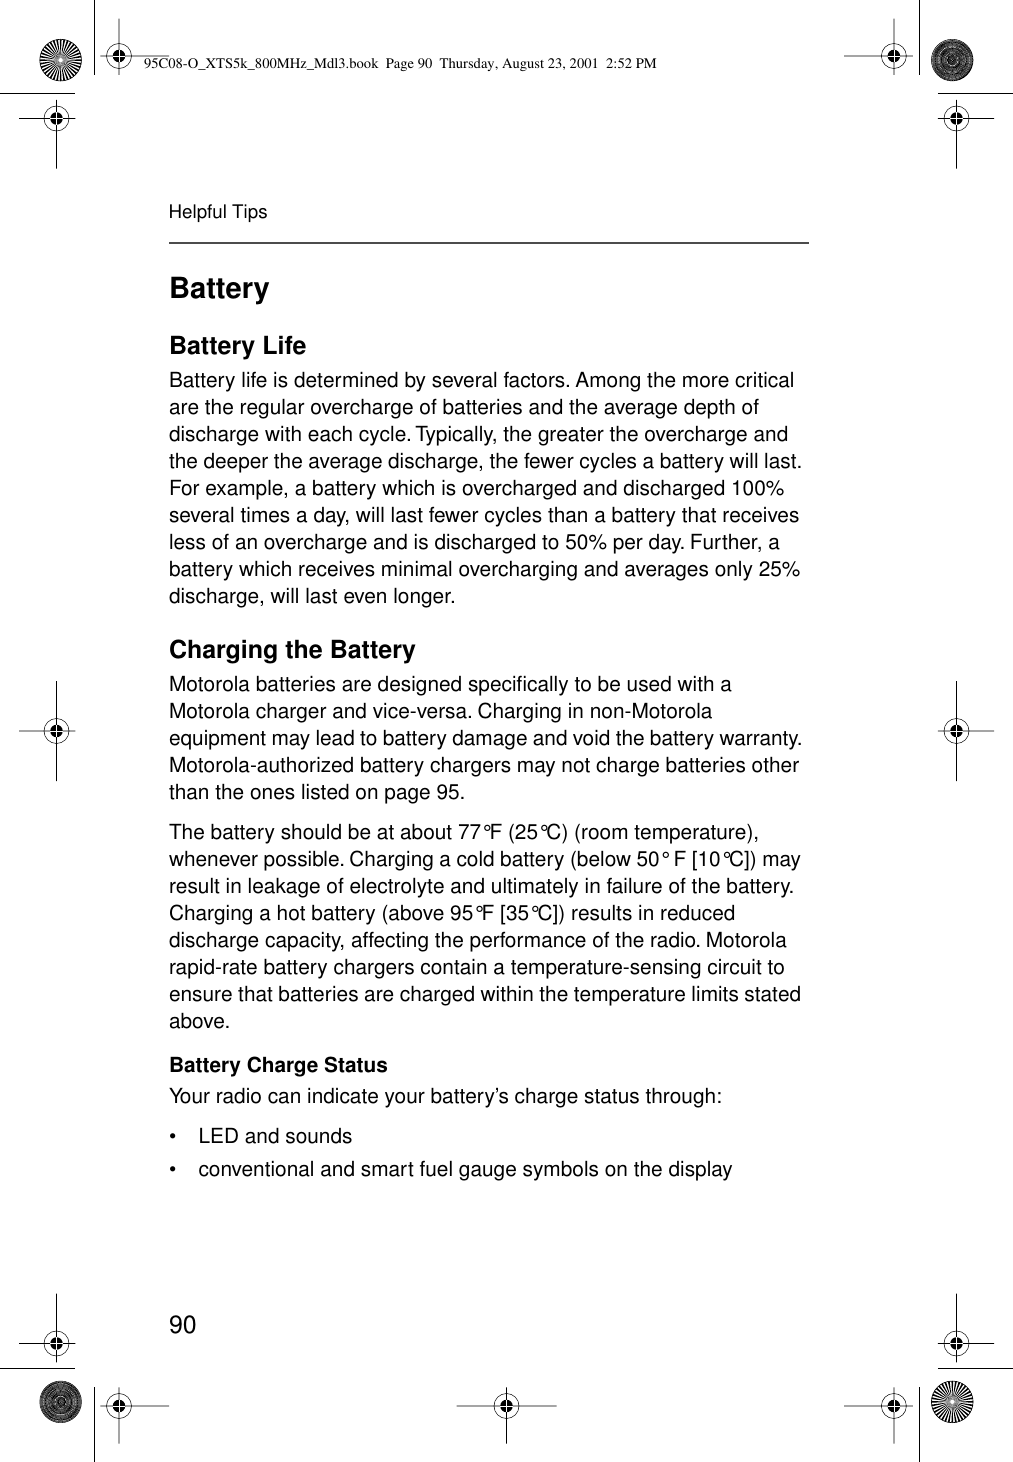 90Helpful TipsBatteryBattery LifeBattery life is determined by several factors. Among the more critical are the regular overcharge of batteries and the average depth of discharge with each cycle. Typically, the greater the overcharge and the deeper the average discharge, the fewer cycles a battery will last. For example, a battery which is overcharged and discharged 100% several times a day, will last fewer cycles than a battery that receives less of an overcharge and is discharged to 50% per day. Further, a battery which receives minimal overcharging and averages only 25% discharge, will last even longer.Charging the BatteryMotorola batteries are designed speciﬁcally to be used with a Motorola charger and vice-versa. Charging in non-Motorola equipment may lead to battery damage and void the battery warranty. Motorola-authorized battery chargers may not charge batteries other than the ones listed on page 95.The battery should be at about 77°F (25°C) (room temperature), whenever possible. Charging a cold battery (below 50° F [10°C]) may result in leakage of electrolyte and ultimately in failure of the battery. Charging a hot battery (above 95°F [35°C]) results in reduced discharge capacity, affecting the performance of the radio. Motorola rapid-rate battery chargers contain a temperature-sensing circuit to ensure that batteries are charged within the temperature limits stated above.Battery Charge StatusYour radio can indicate your battery’s charge status through:• LED and sounds• conventional and smart fuel gauge symbols on the display95C08-O_XTS5k_800MHz_Mdl3.book  Page 90  Thursday, August 23, 2001  2:52 PM